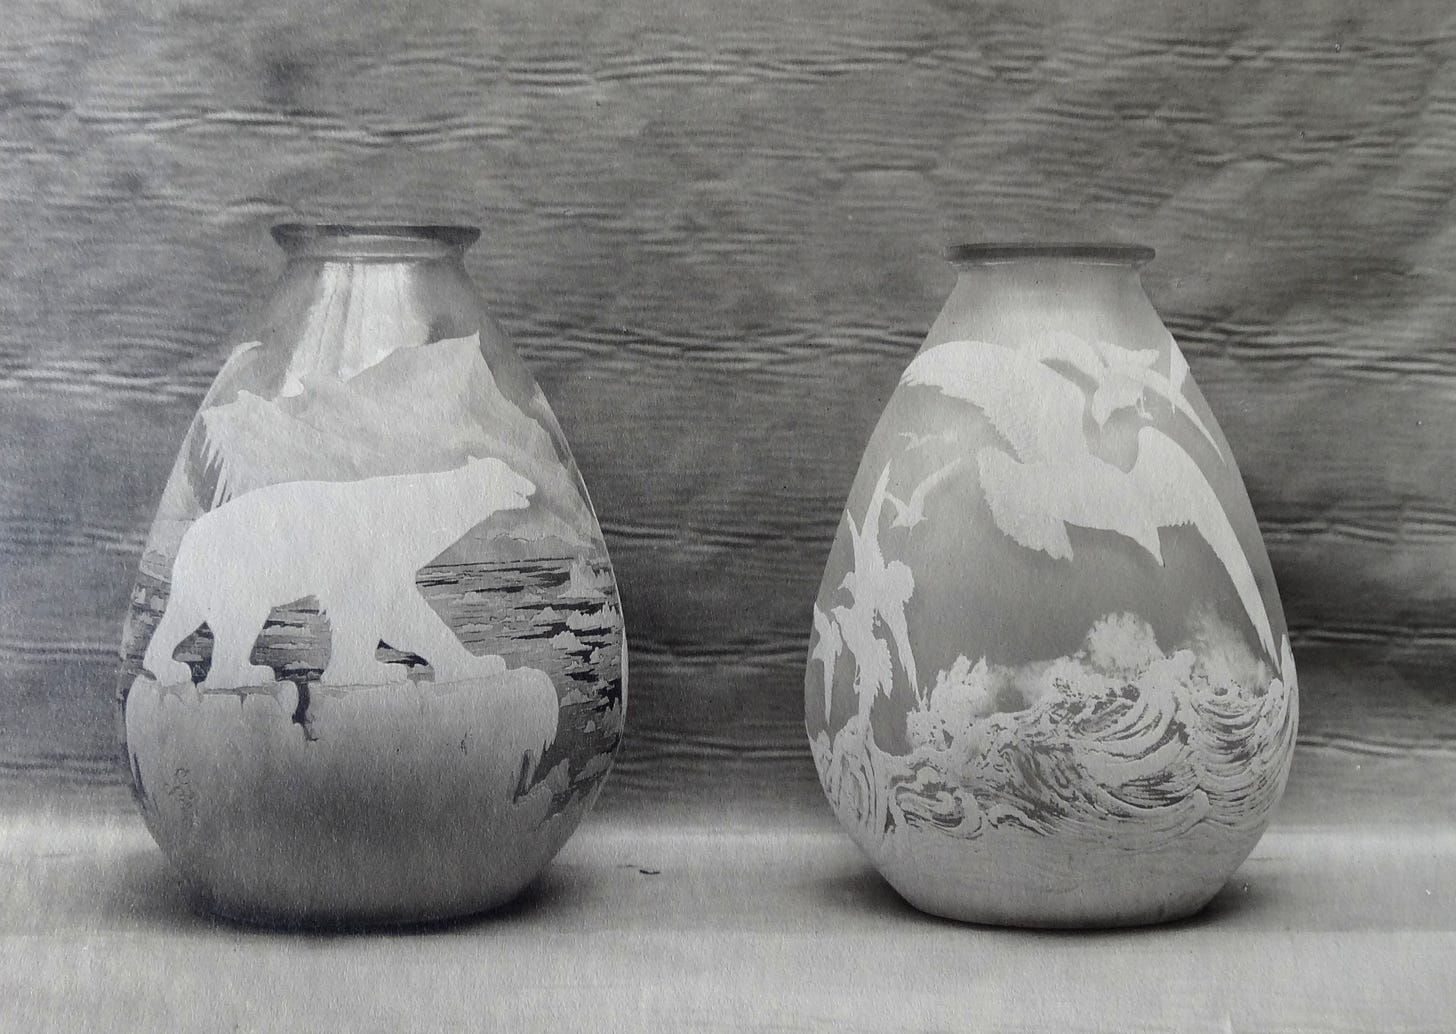 The Polar bears (with the Mk IX signature) and the Seagull vases from the Perdrizet sales album, early 1930s, private collection.